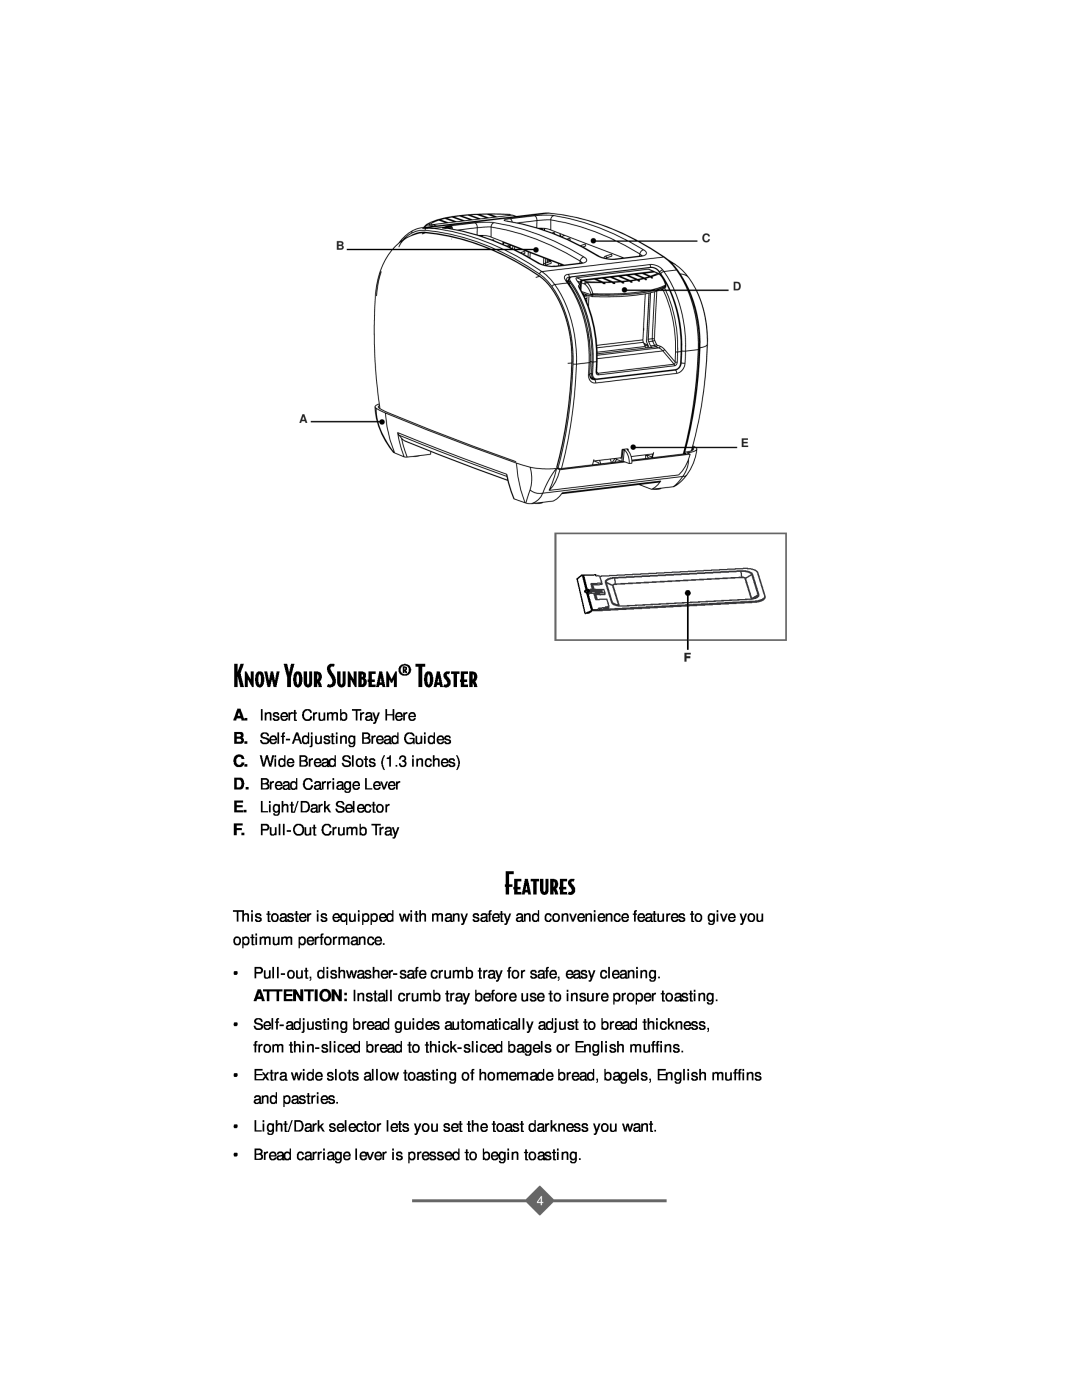 Sunbeam 3806 instruction manual Features, Know Your Sunbeam¨ Toaster 